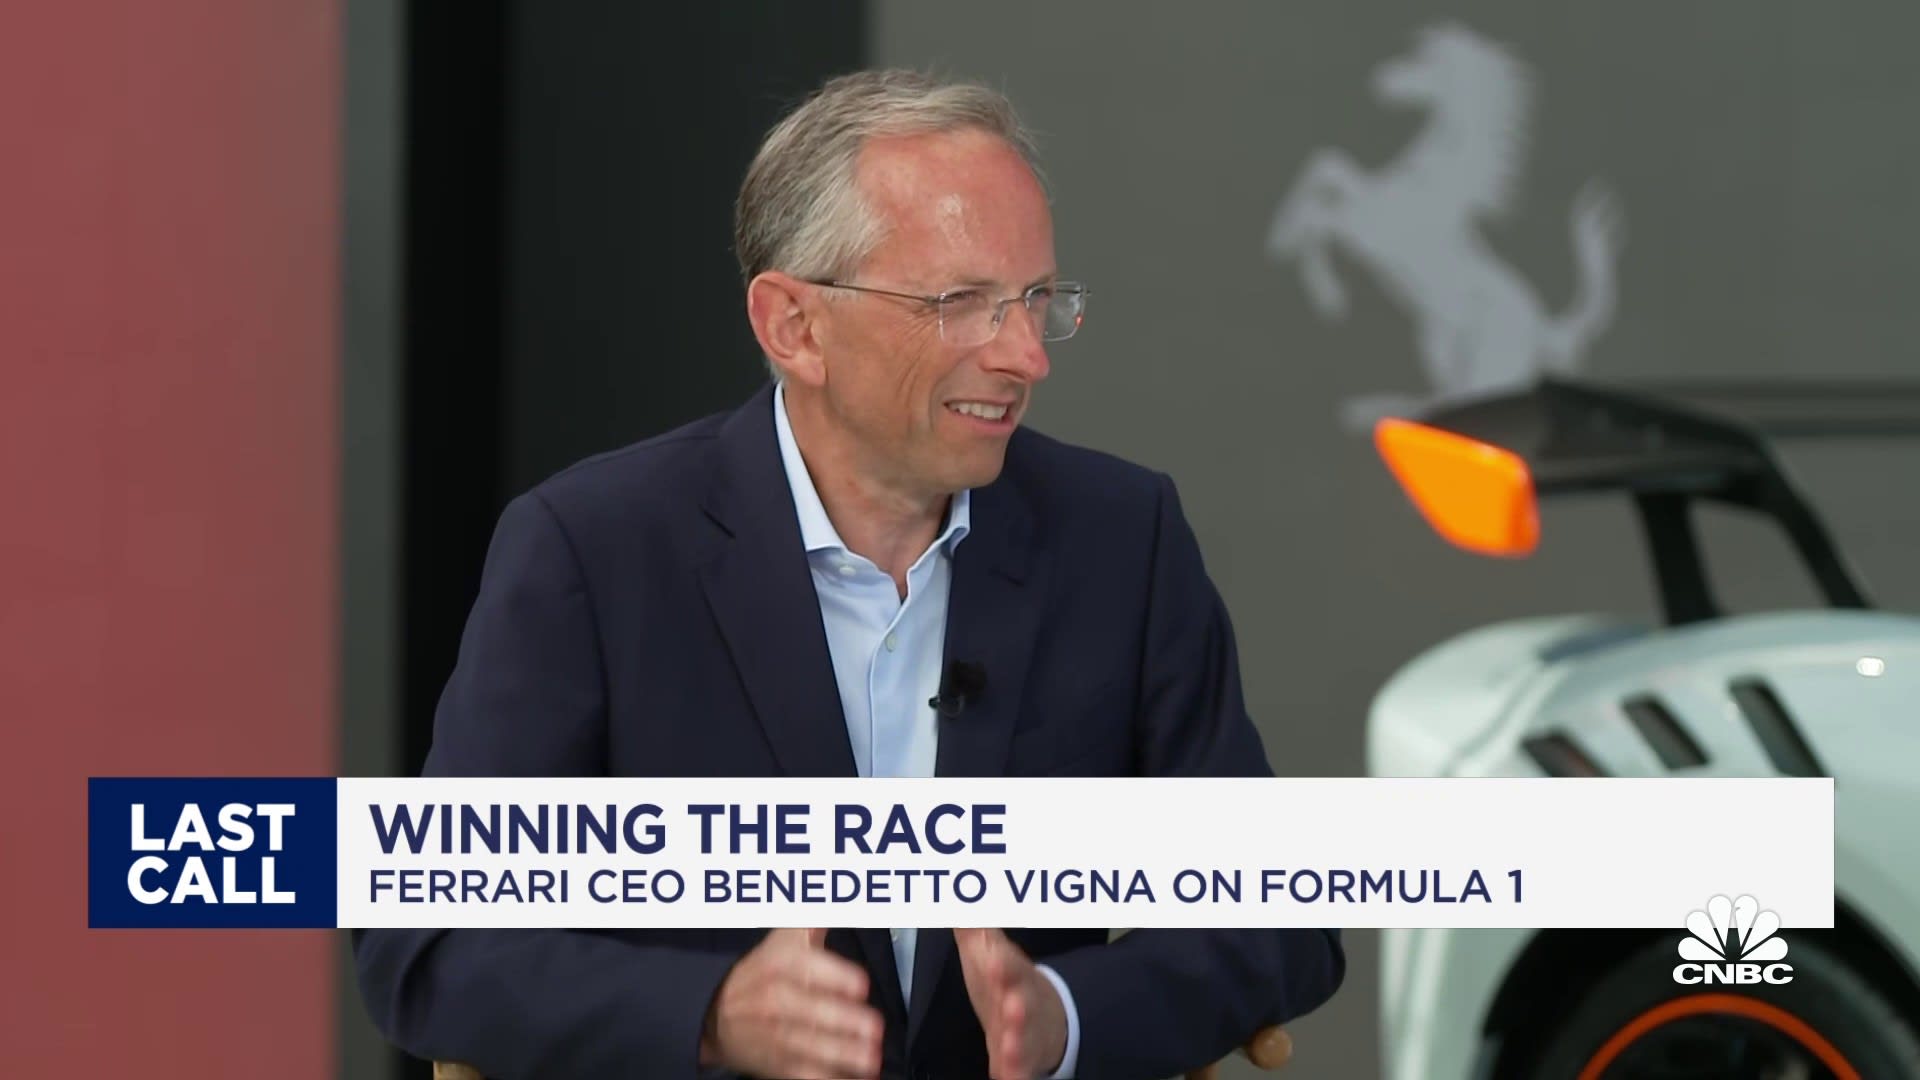 Watch CNBC's full exclusive interview with Ferrari CEO Benedetto Vigna